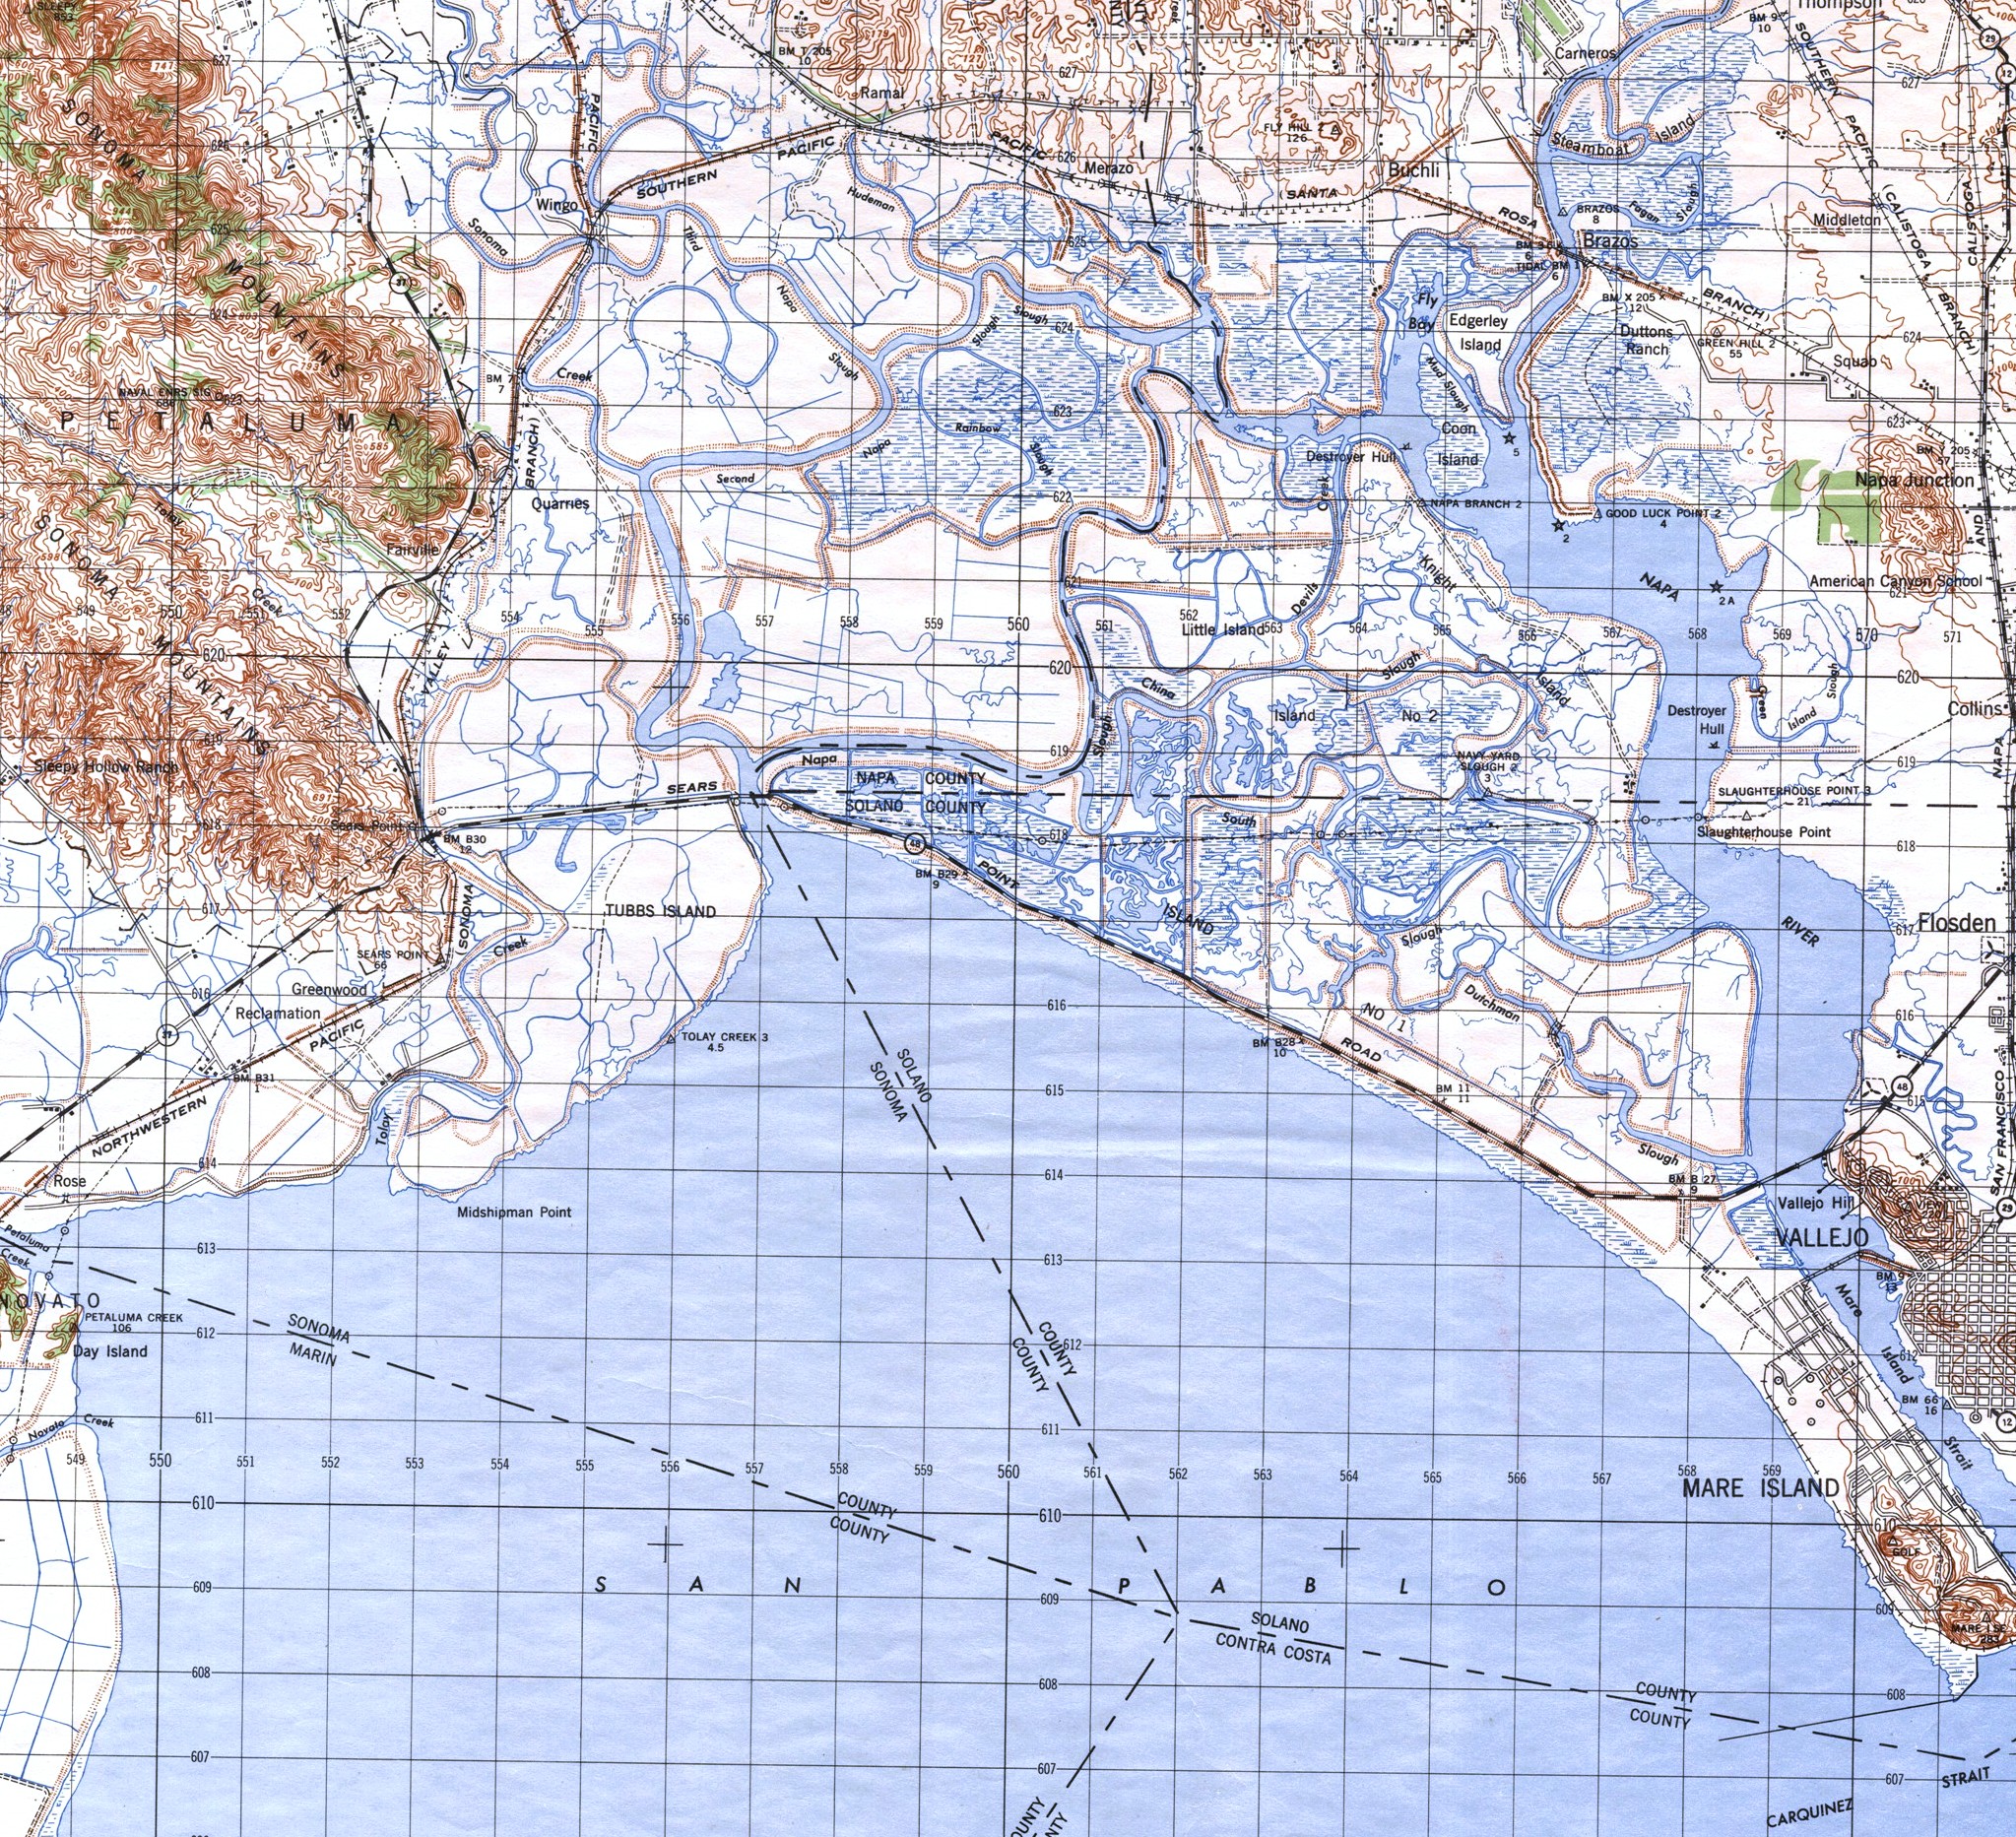 Excerpt from the 1946 United States Army Corps of Engineers map of San Pablo Bay showing the Mare Island, Vallejo, California, and the Naval Shipyard.